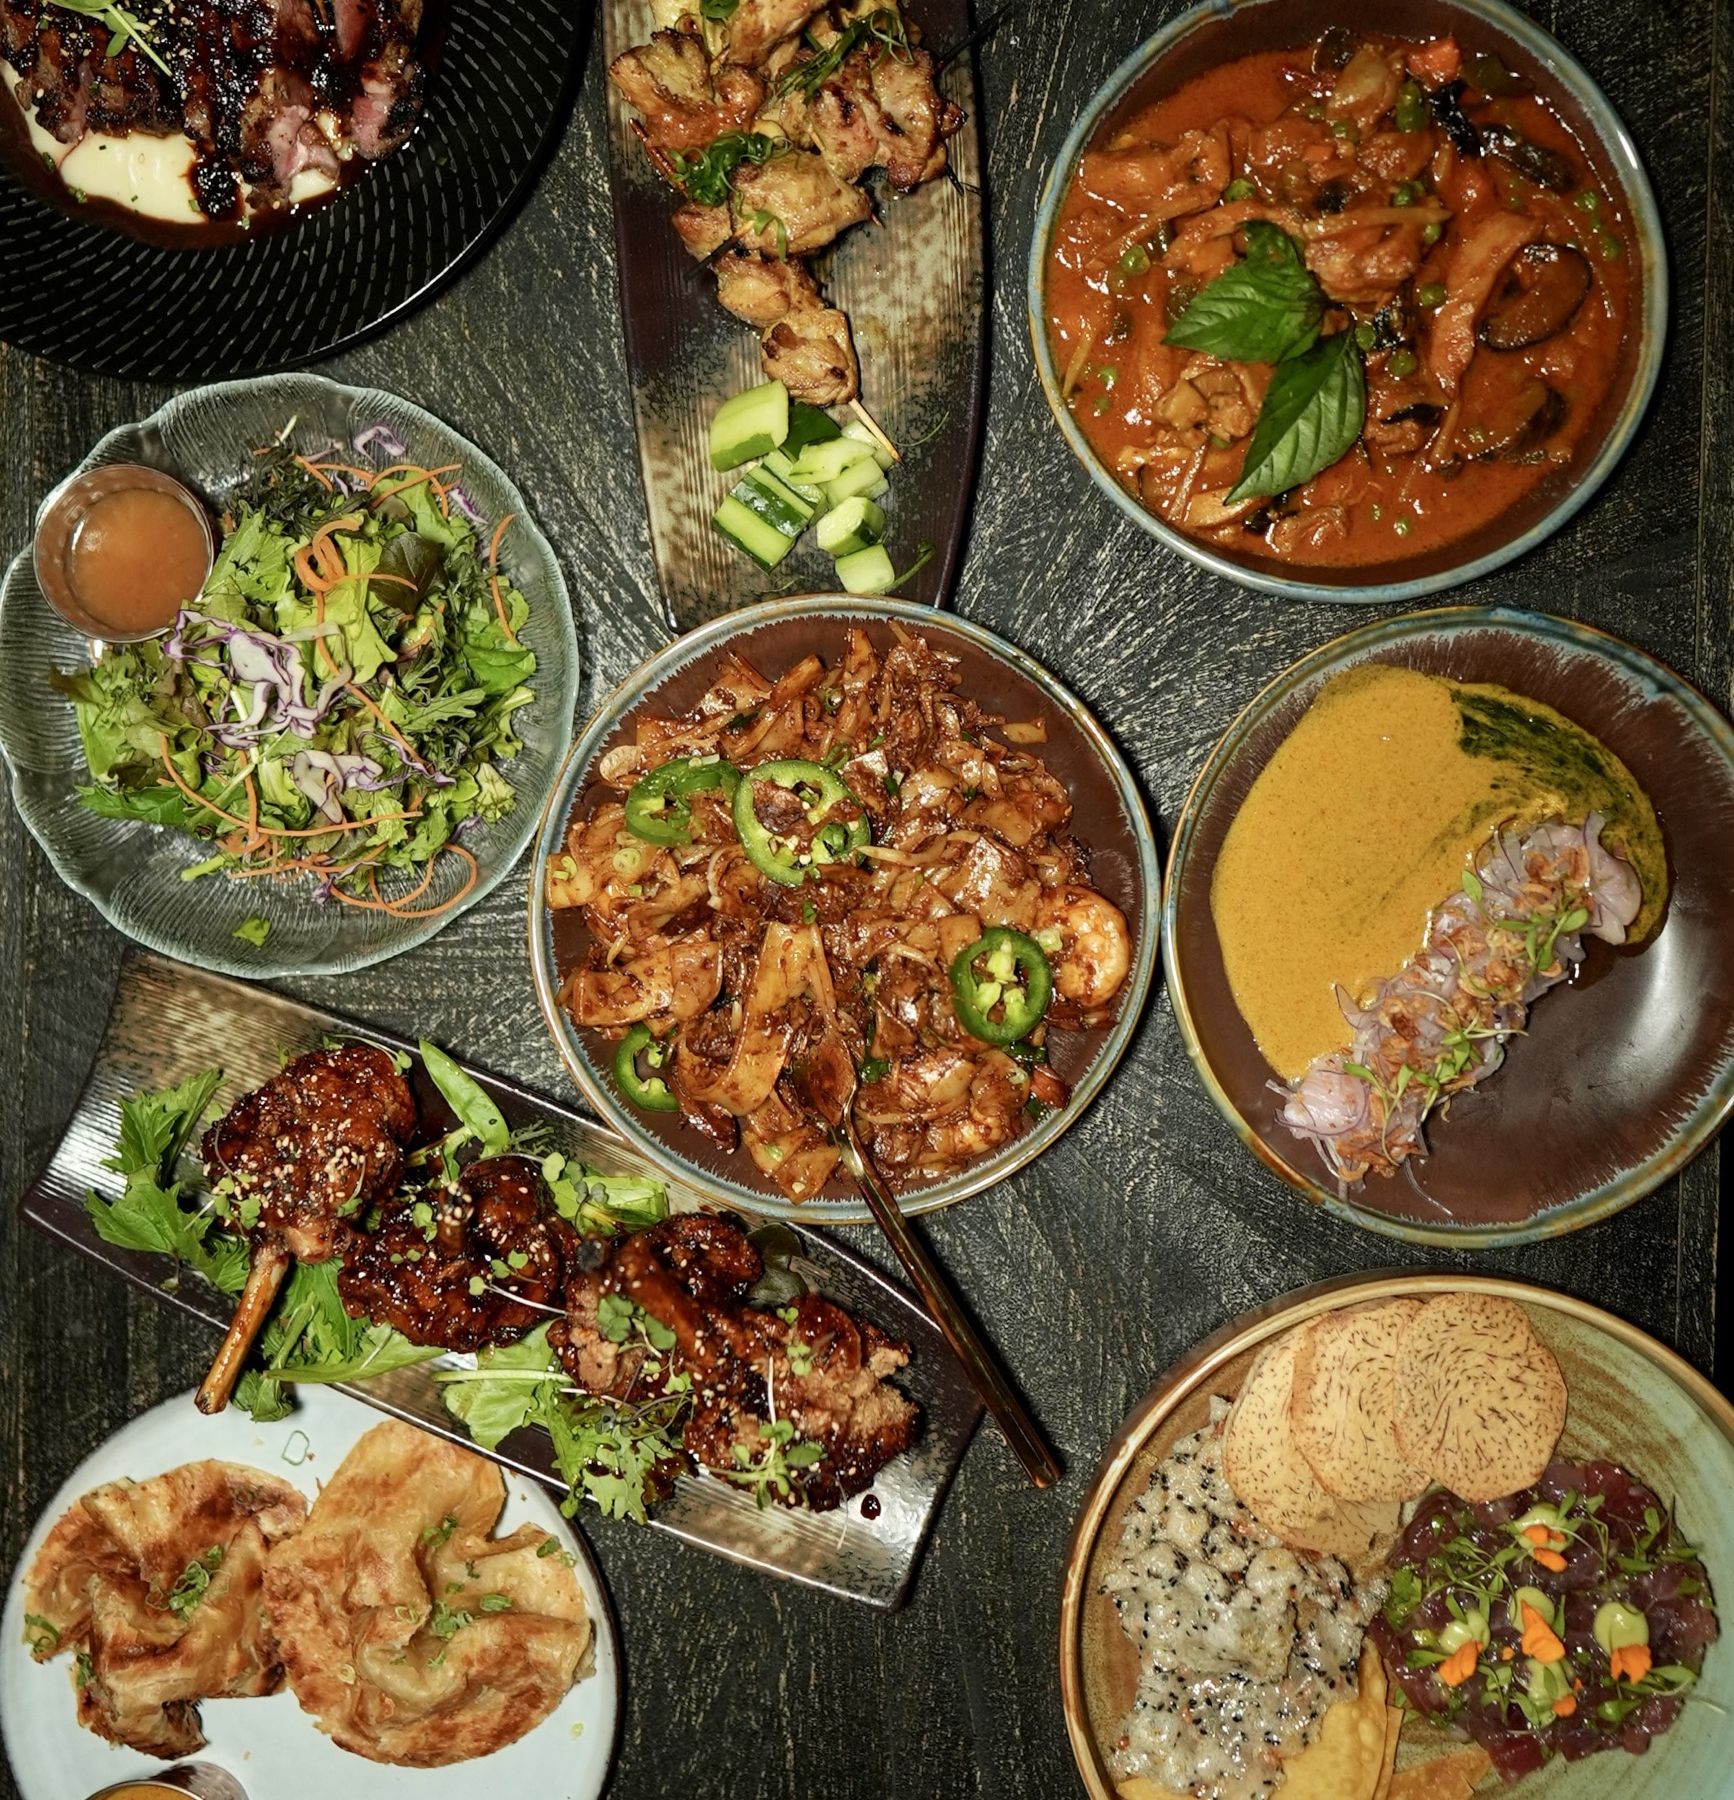 Straits captures a variety of fragrant flavors from Singapore in dishes meant to be shared. The vibrant environment of the restaurant reflects the exotic cuisines inspired by diverse cultures.